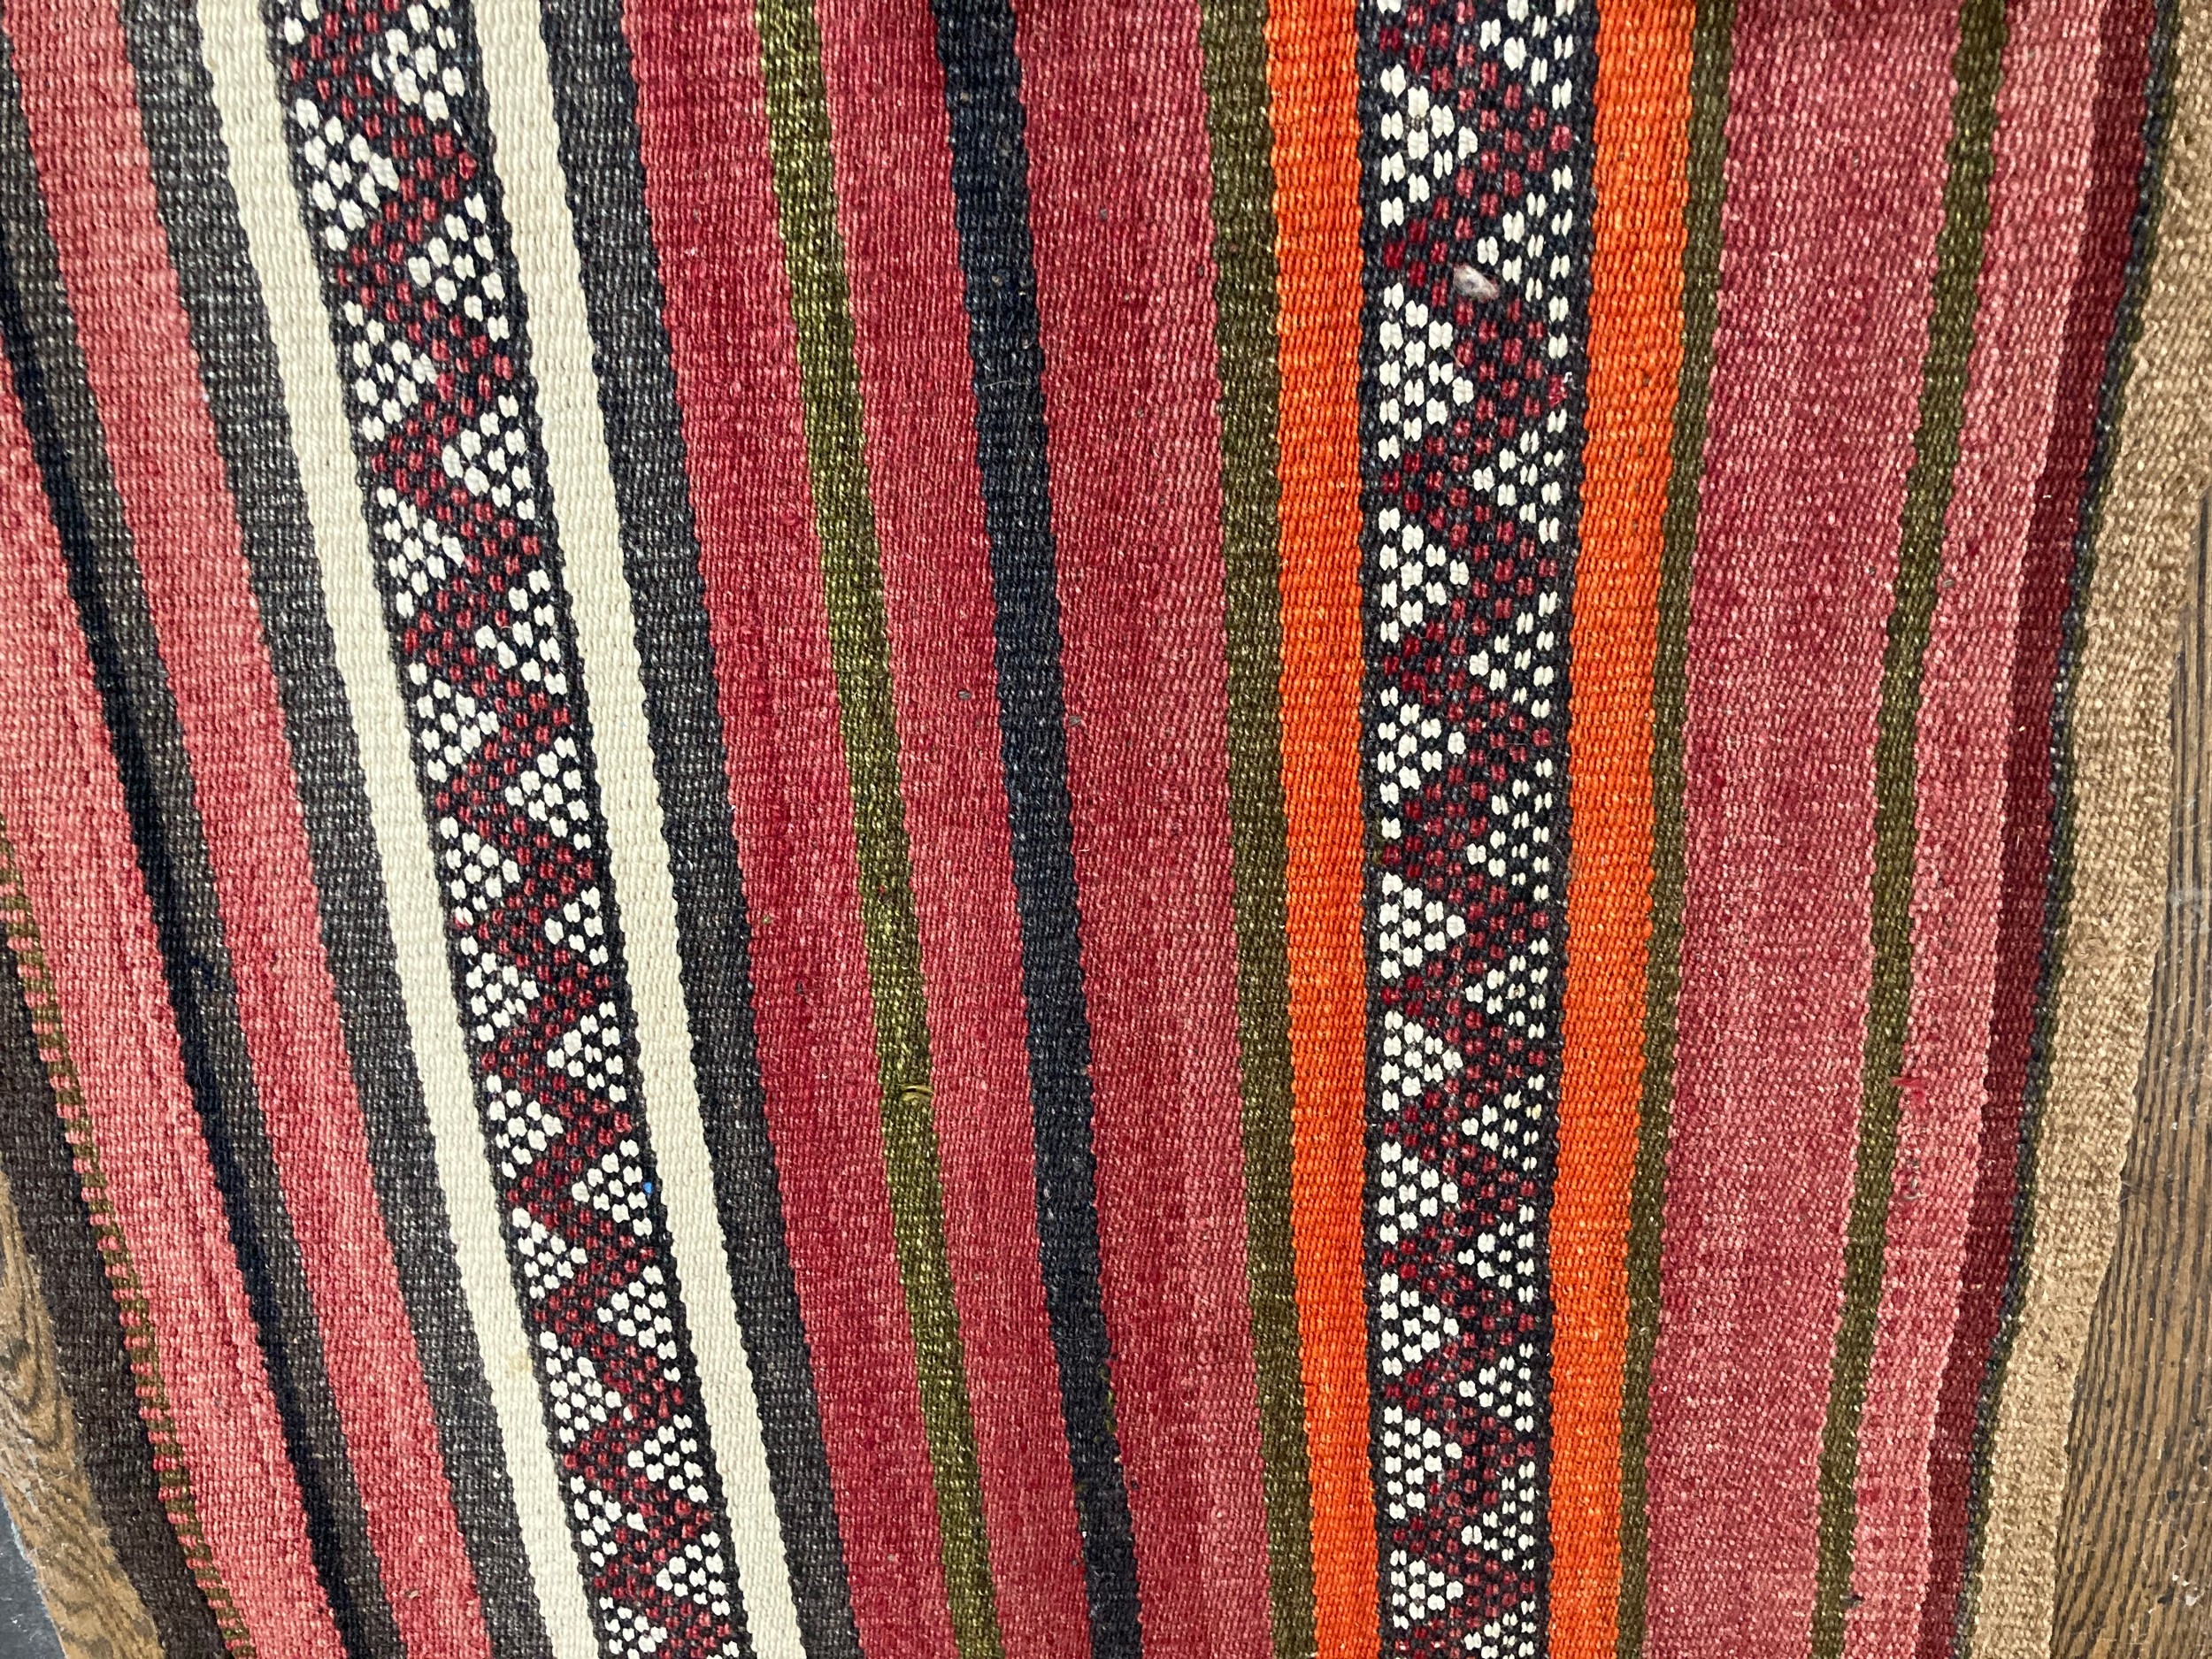 Tribal Rugs: an old Kilim Runner, 100% wool, woven with stripes in subtle colours - plum, dusky red, - Image 2 of 4